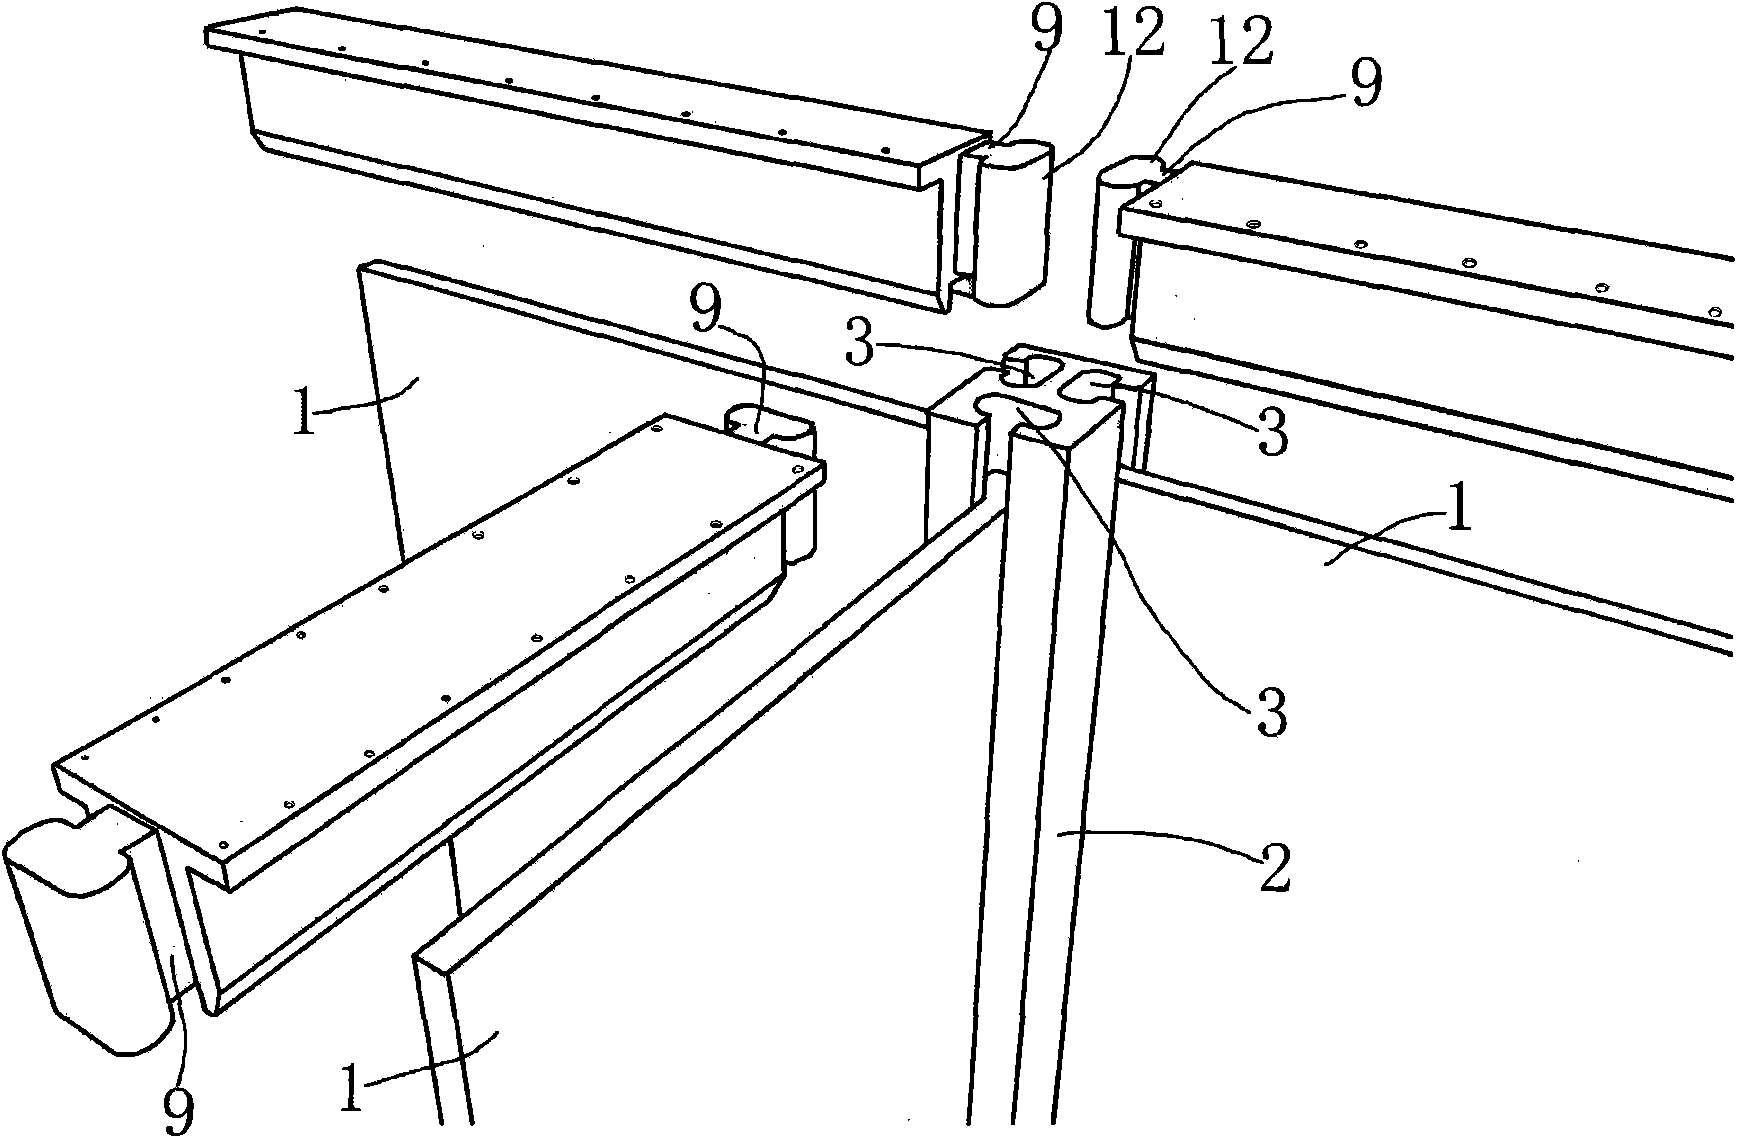 Cabinet body structure